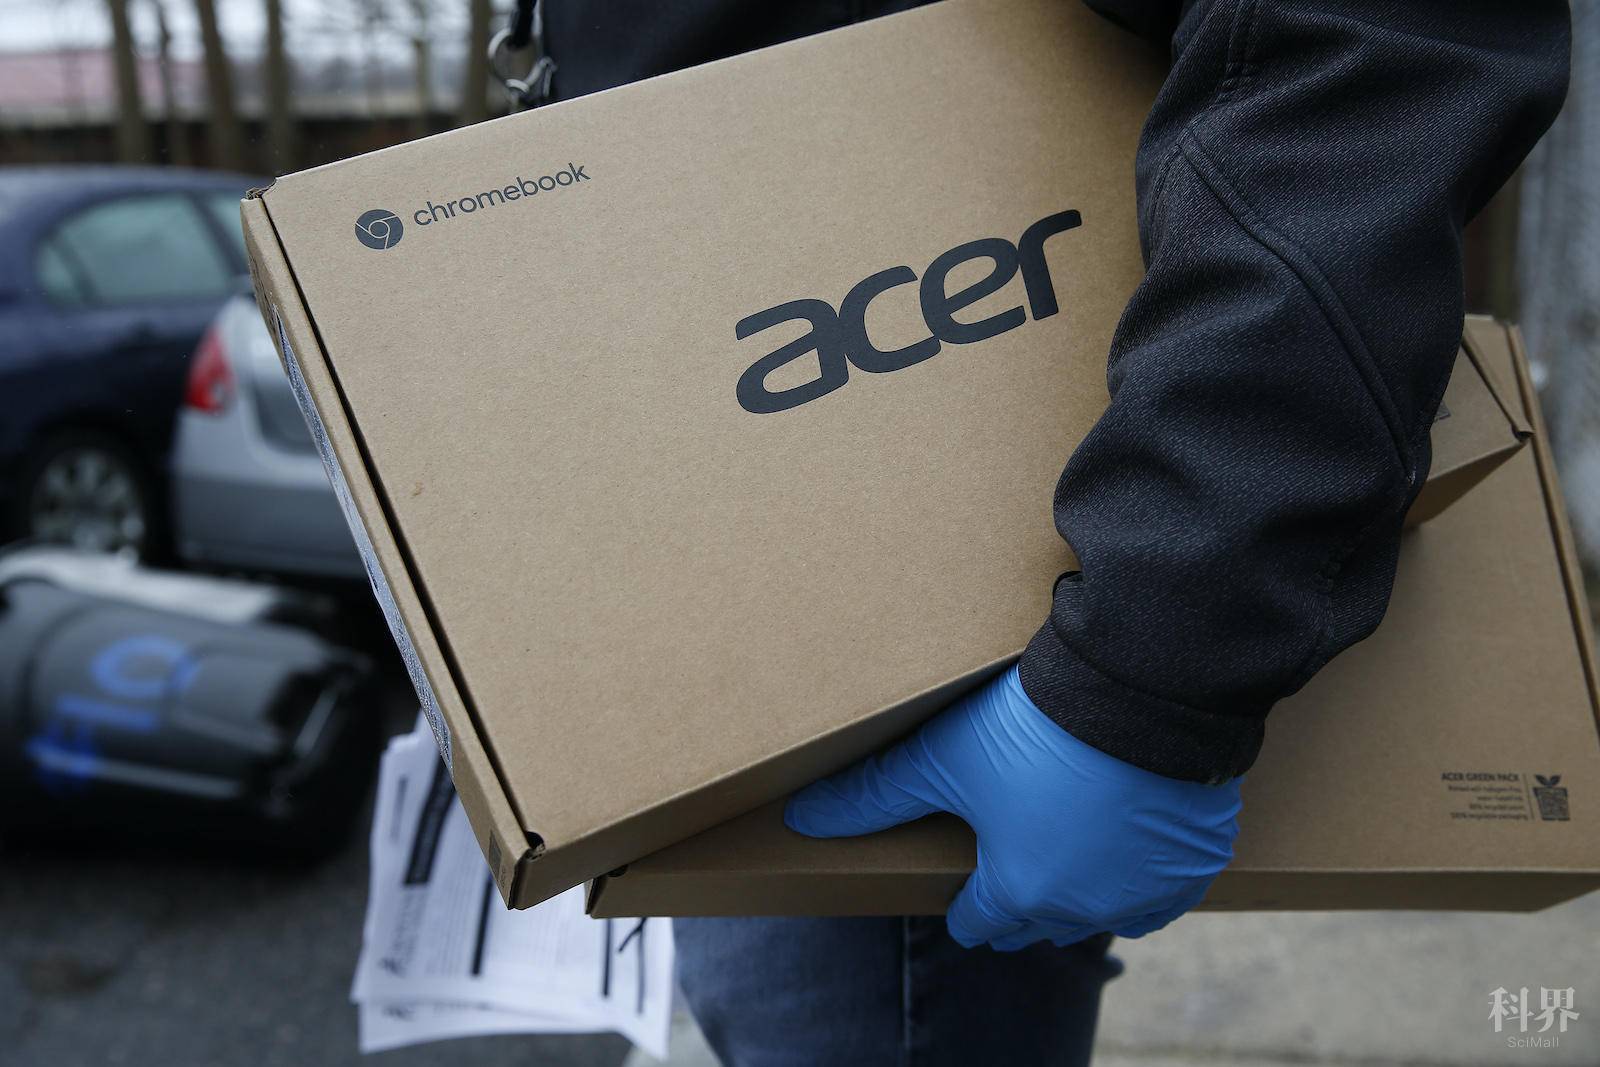 BOSTON, MA - MARCH 19: Boston Public Schools employee Giscar Centeio holds two laptops as he does a dry run going door to door handing out Acer chromebooks to students in Boston on March 19, 2020. Students have to do classwork from home now that all Massachusetts schools have closed to stop the spread of coronavirus. (Photo by Jessica Rinaldi/The Boston Globe via Getty Images)